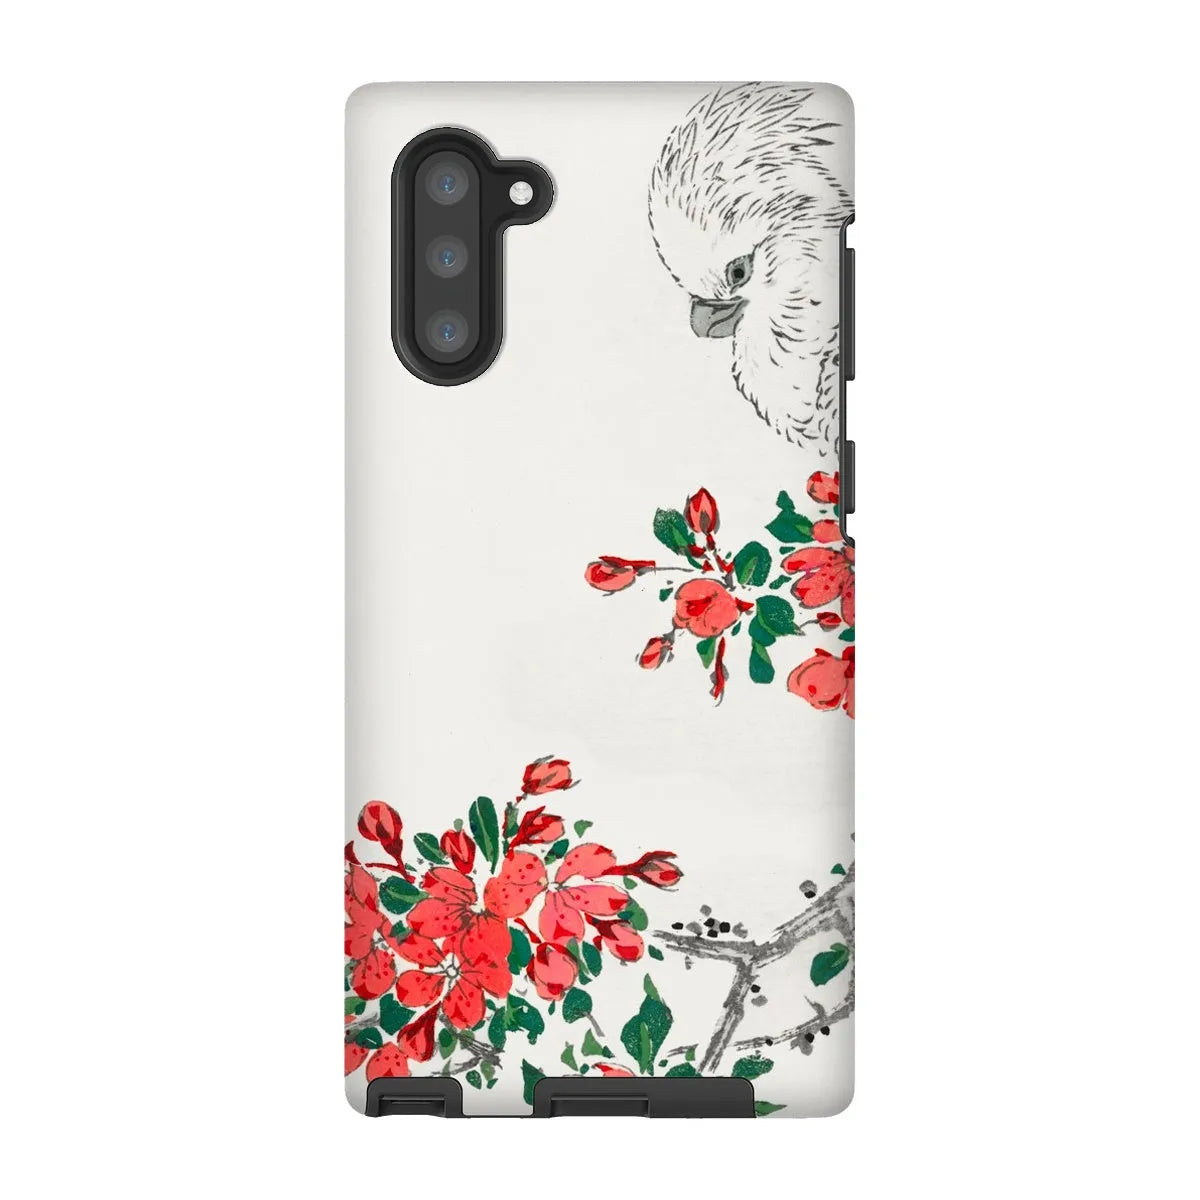 Parrot And Pyrus - Japanese Bird Phone Case - Numata Kashu - Samsung Galaxy Note 10 / Matte - Mobile Phone Cases